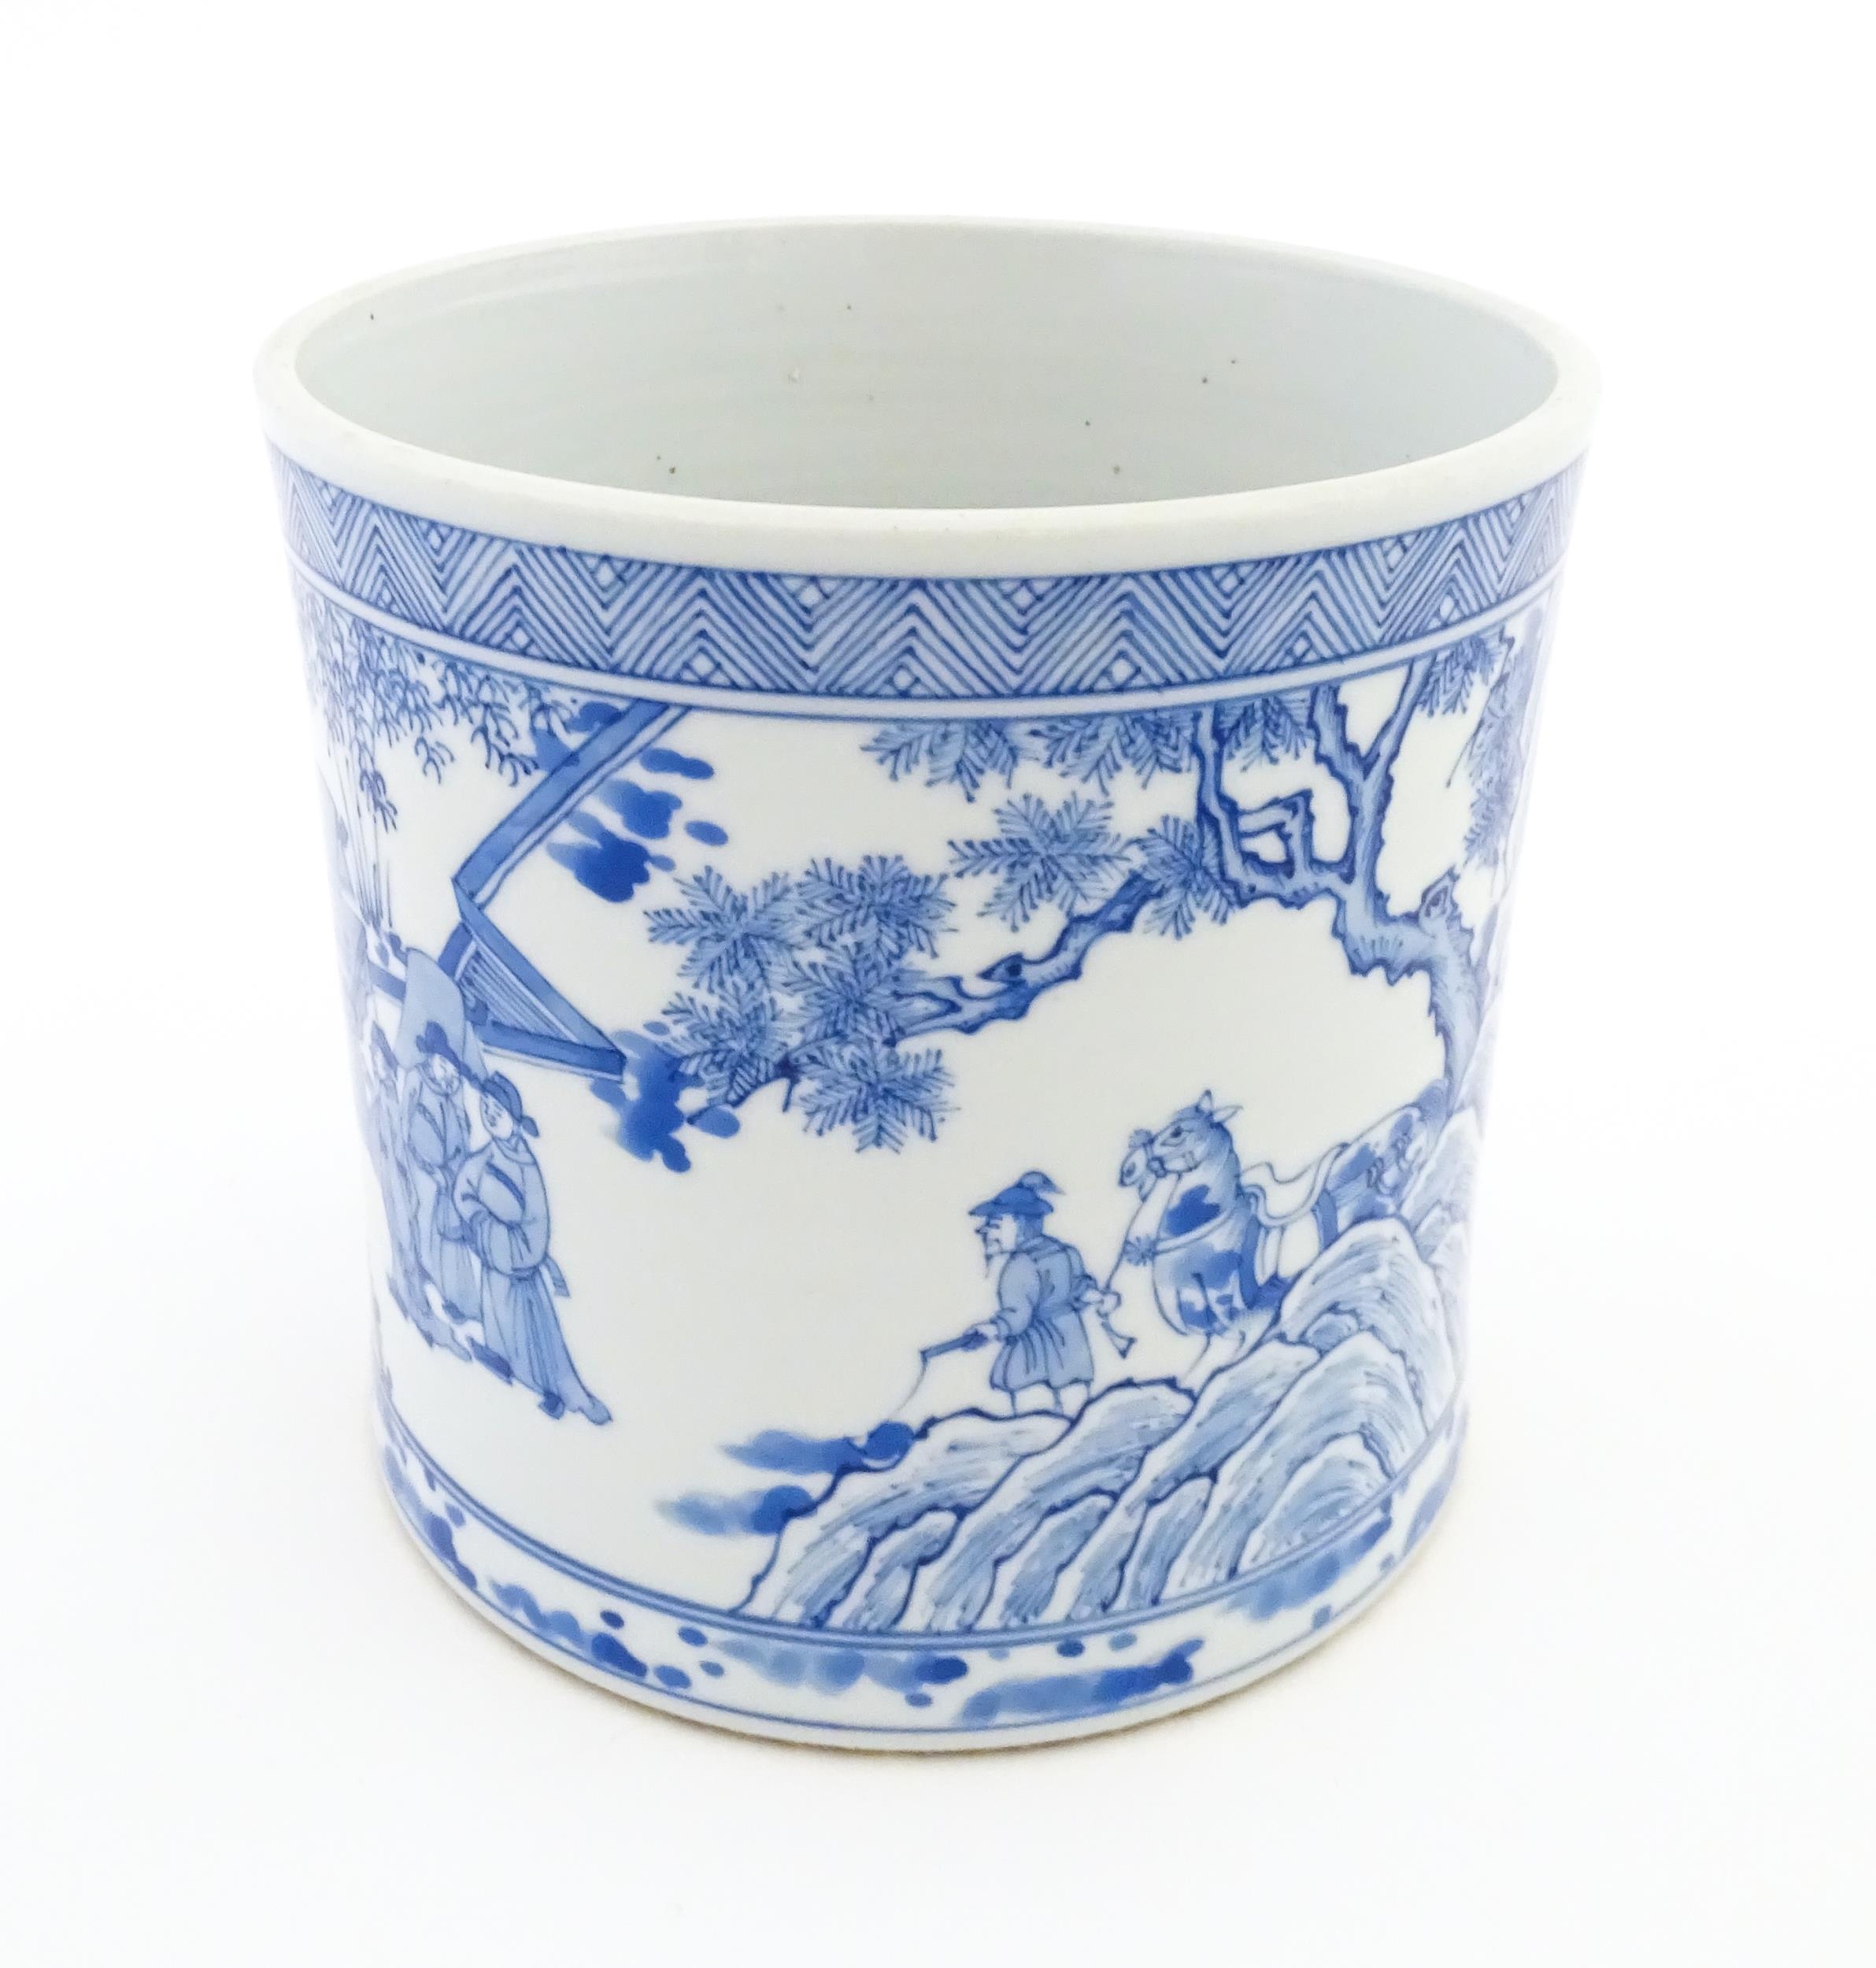 A Chinese blue and white vase / planter decorated with figures in a garden setting with a feast, and - Image 7 of 8